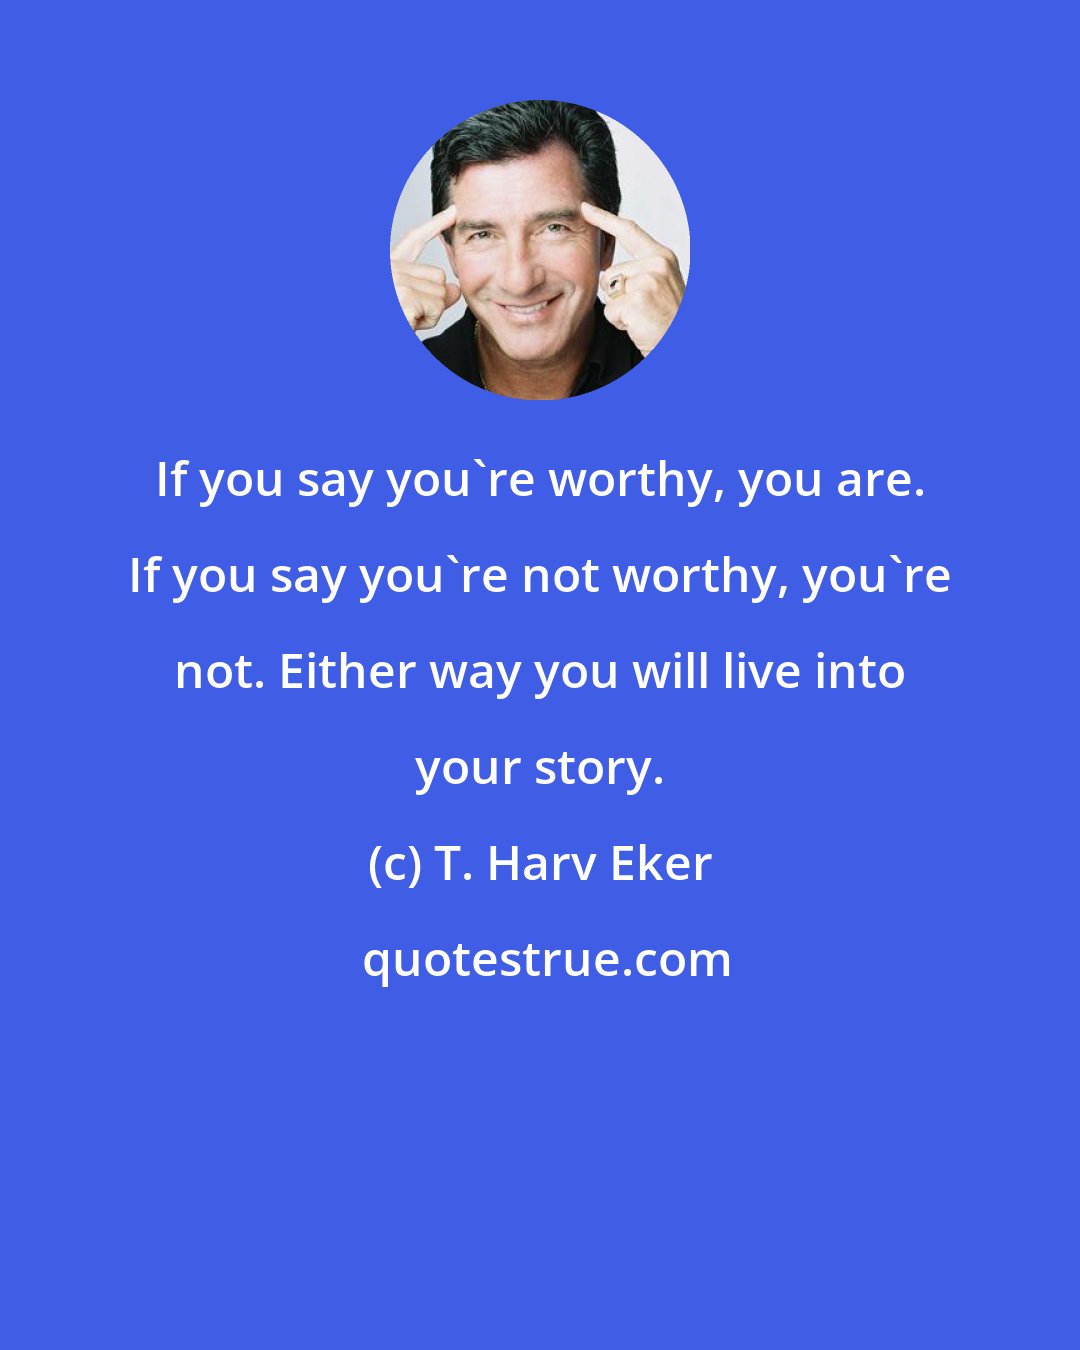 T. Harv Eker: If you say you're worthy, you are. If you say you're not worthy, you're not. Either way you will live into your story.